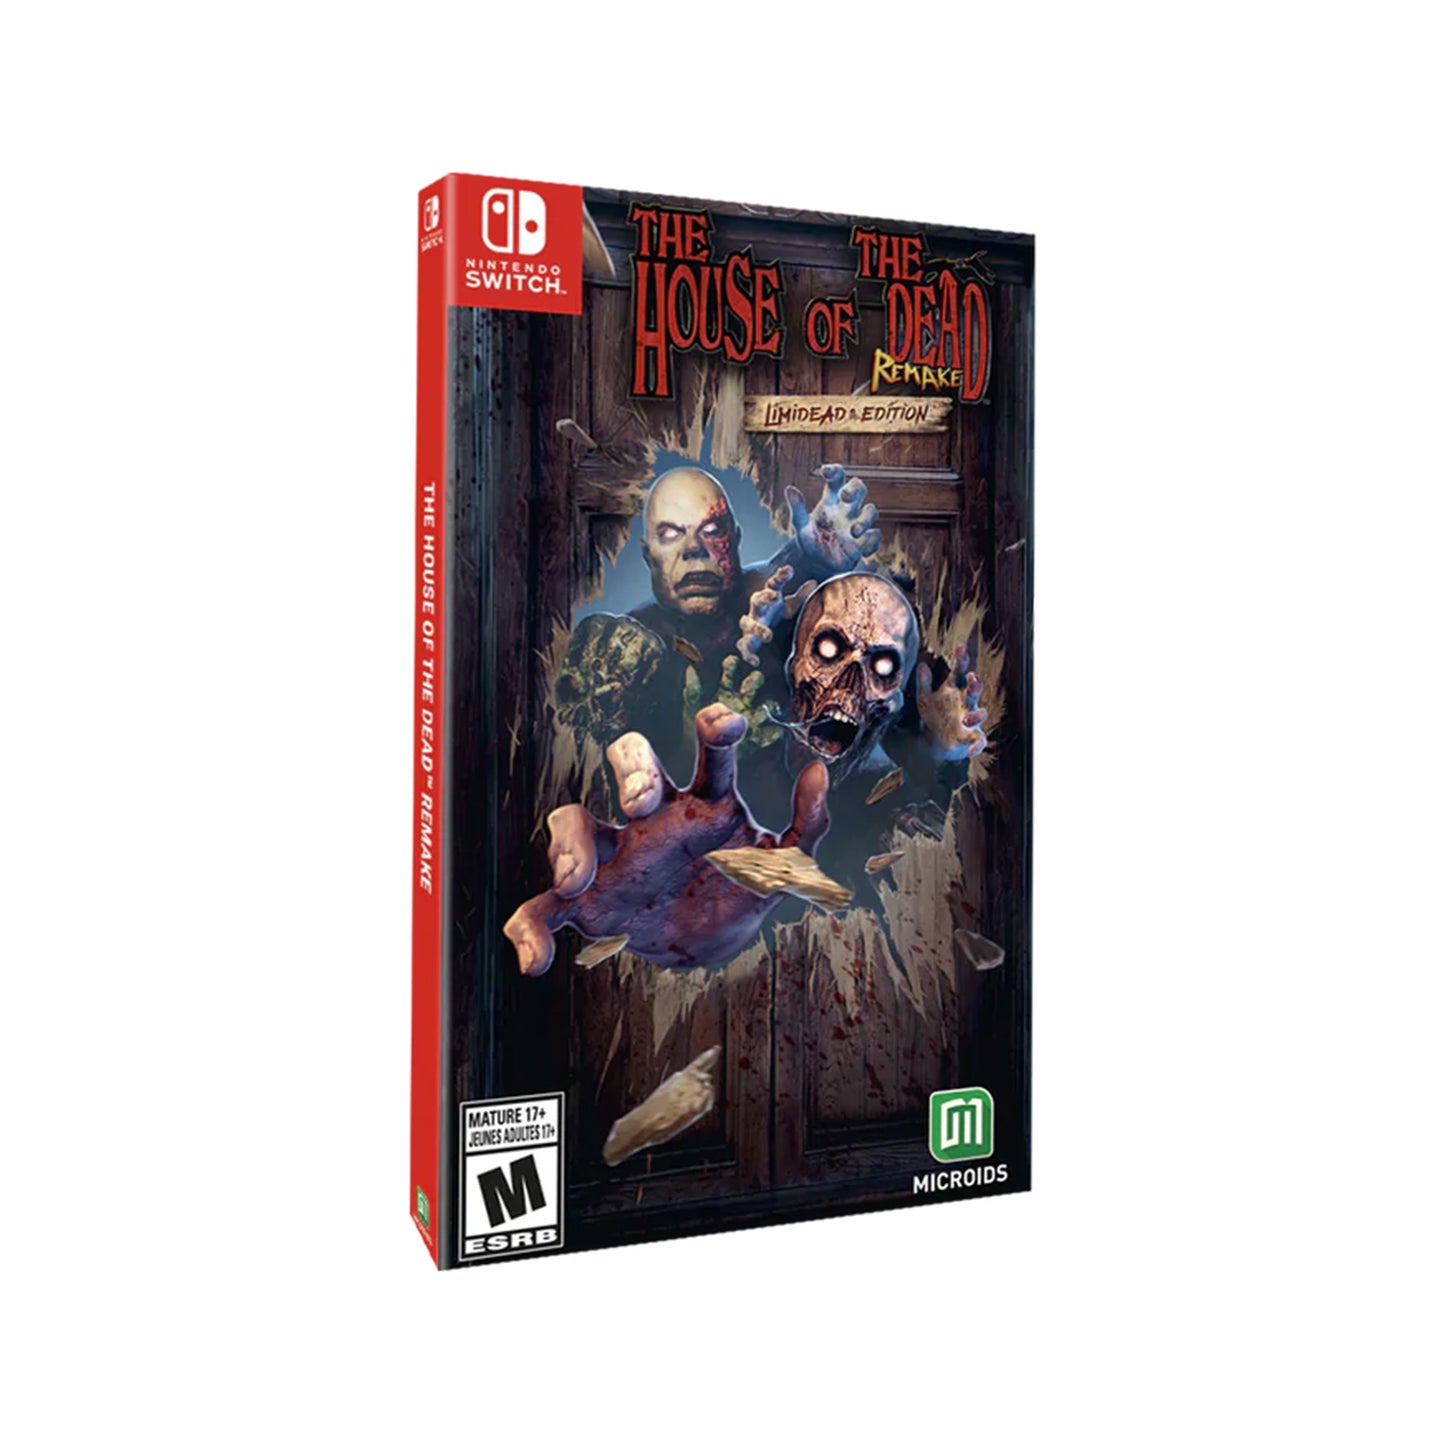 THE HOUSE OF THE DEAD: REMAKE [LIMIDEAD EDITION] - SWITCH